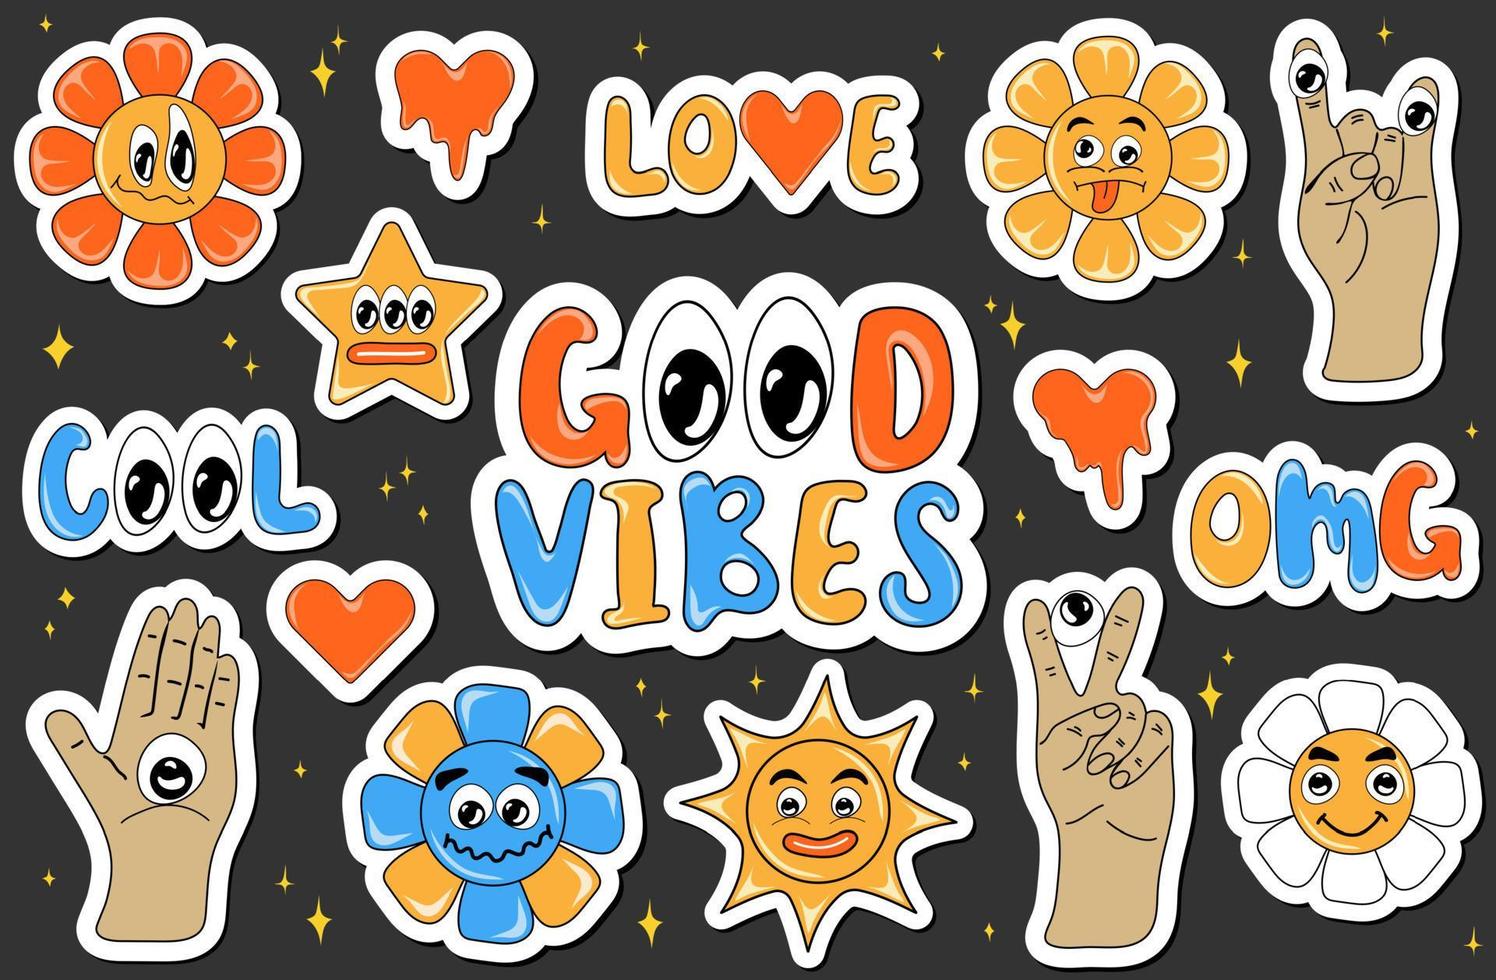 Cool Trendy Retro Stickers Collection. Funny comic character art and quote sign bundle vector